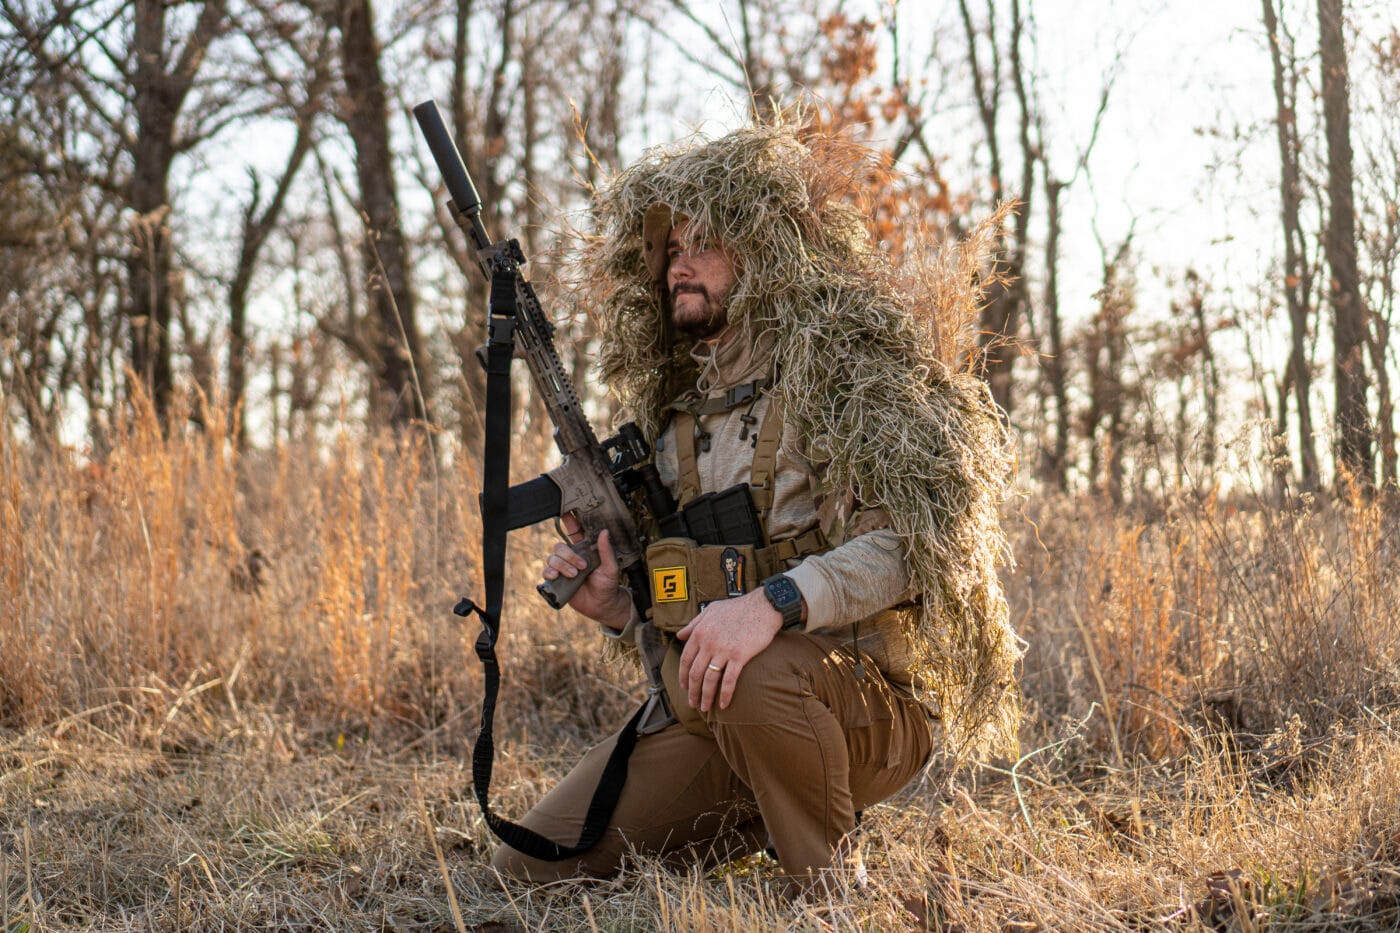 Man hunting with a DIY ghillie suit